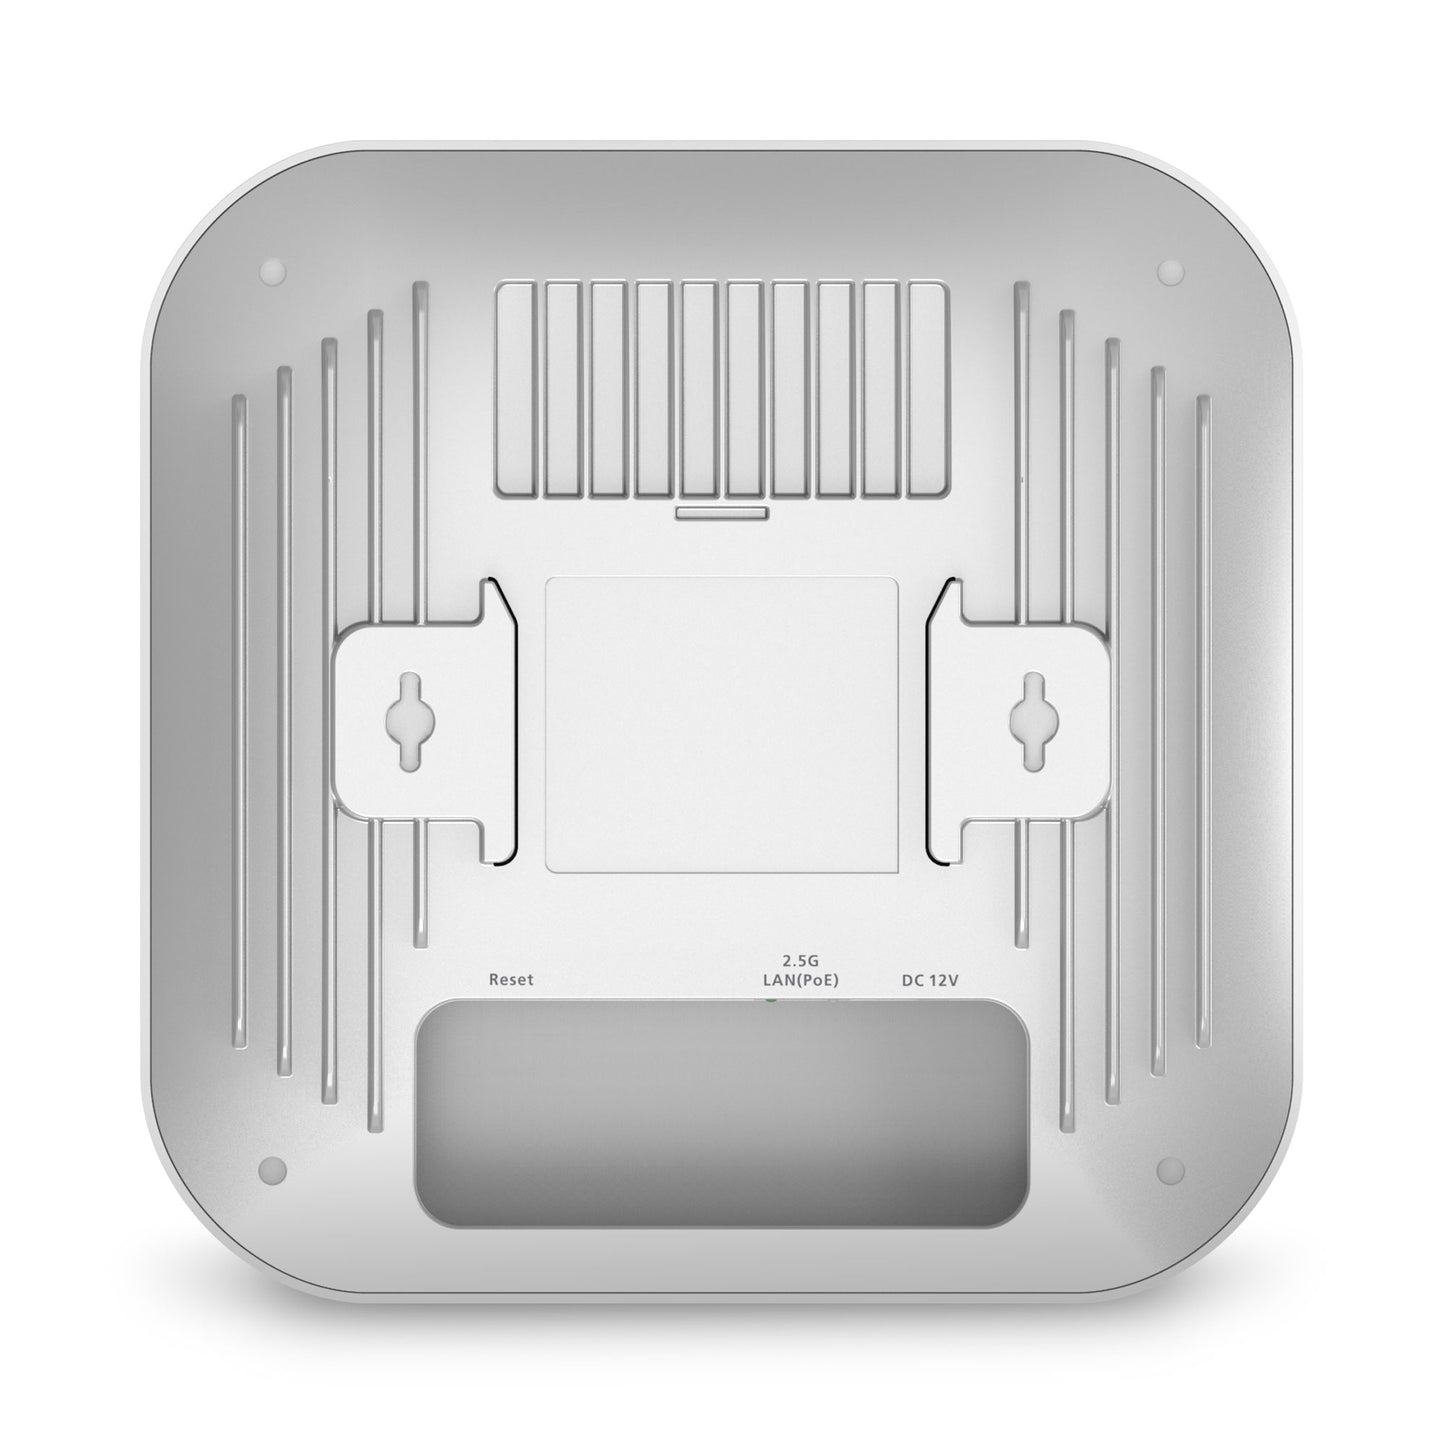 EnGenius (Fit) WiFi 6 Access Point (4x4 MU-MIMO) - EWS377-FIT